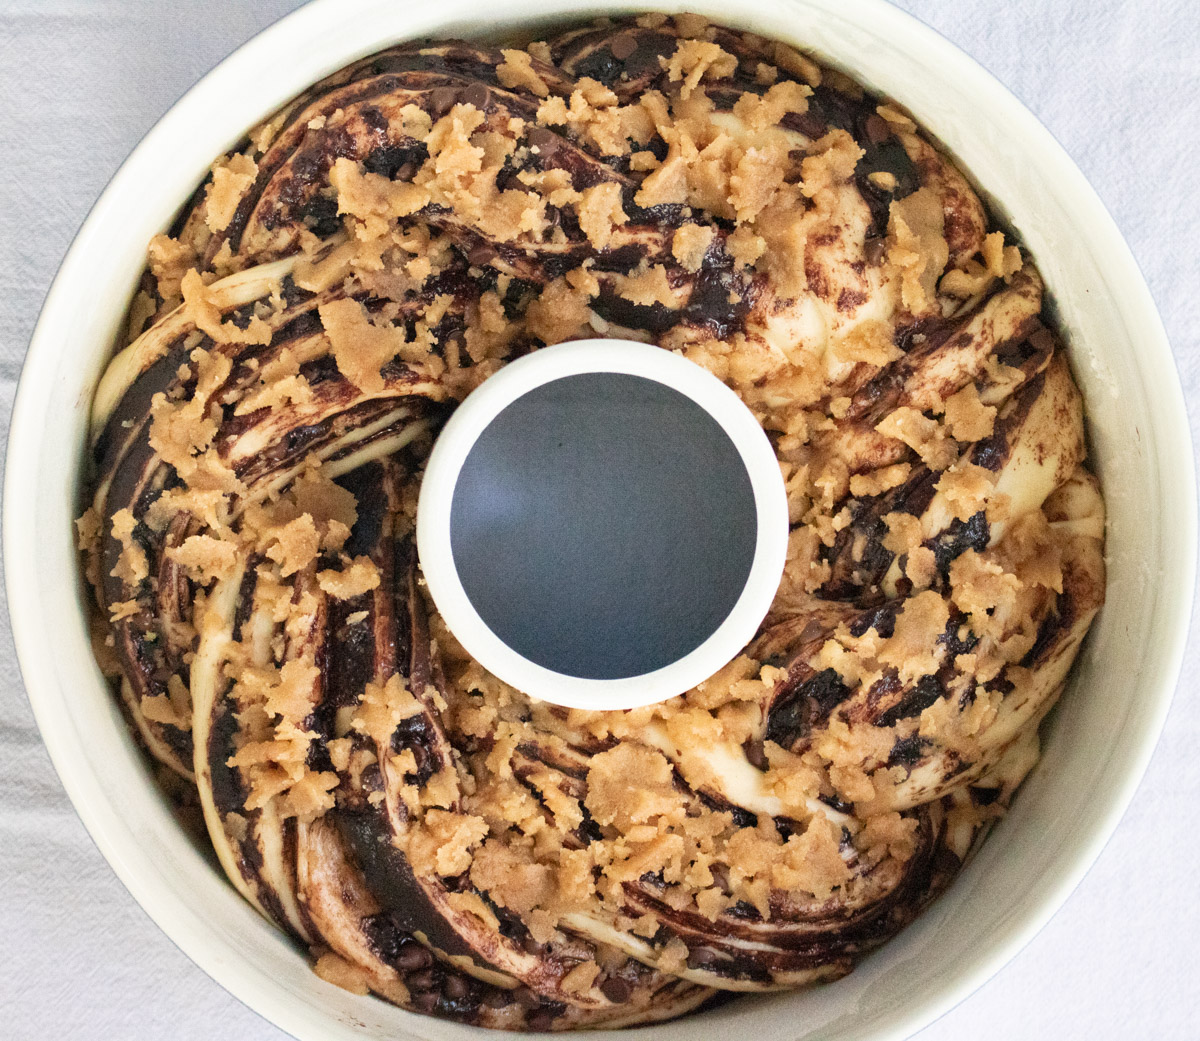 braided babka in tube pan after second rise